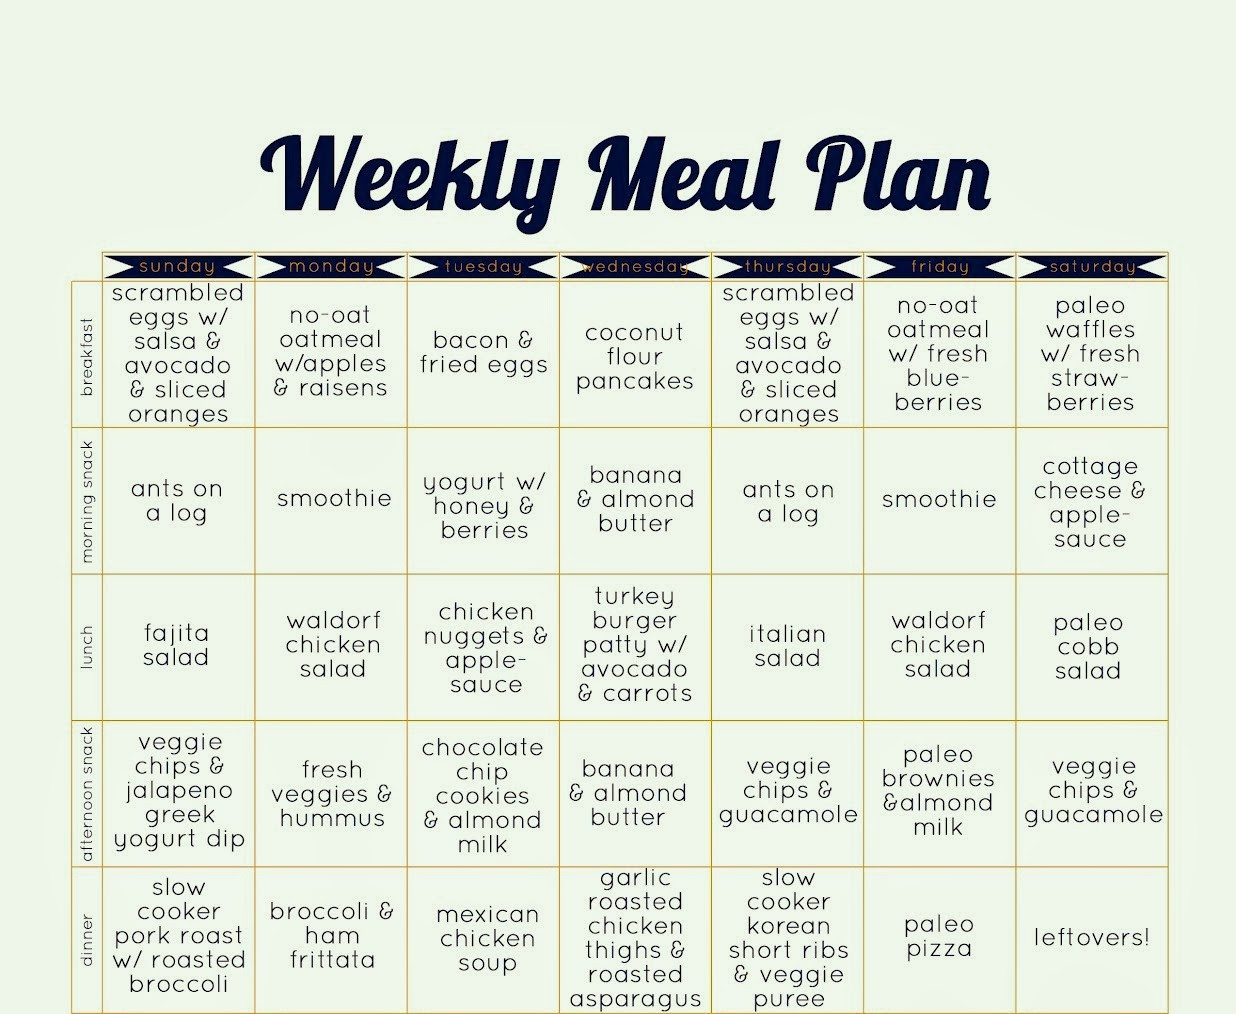 Paleo Diet Food Plans
 Looking for an ideal paleo t meal plan The Paleo